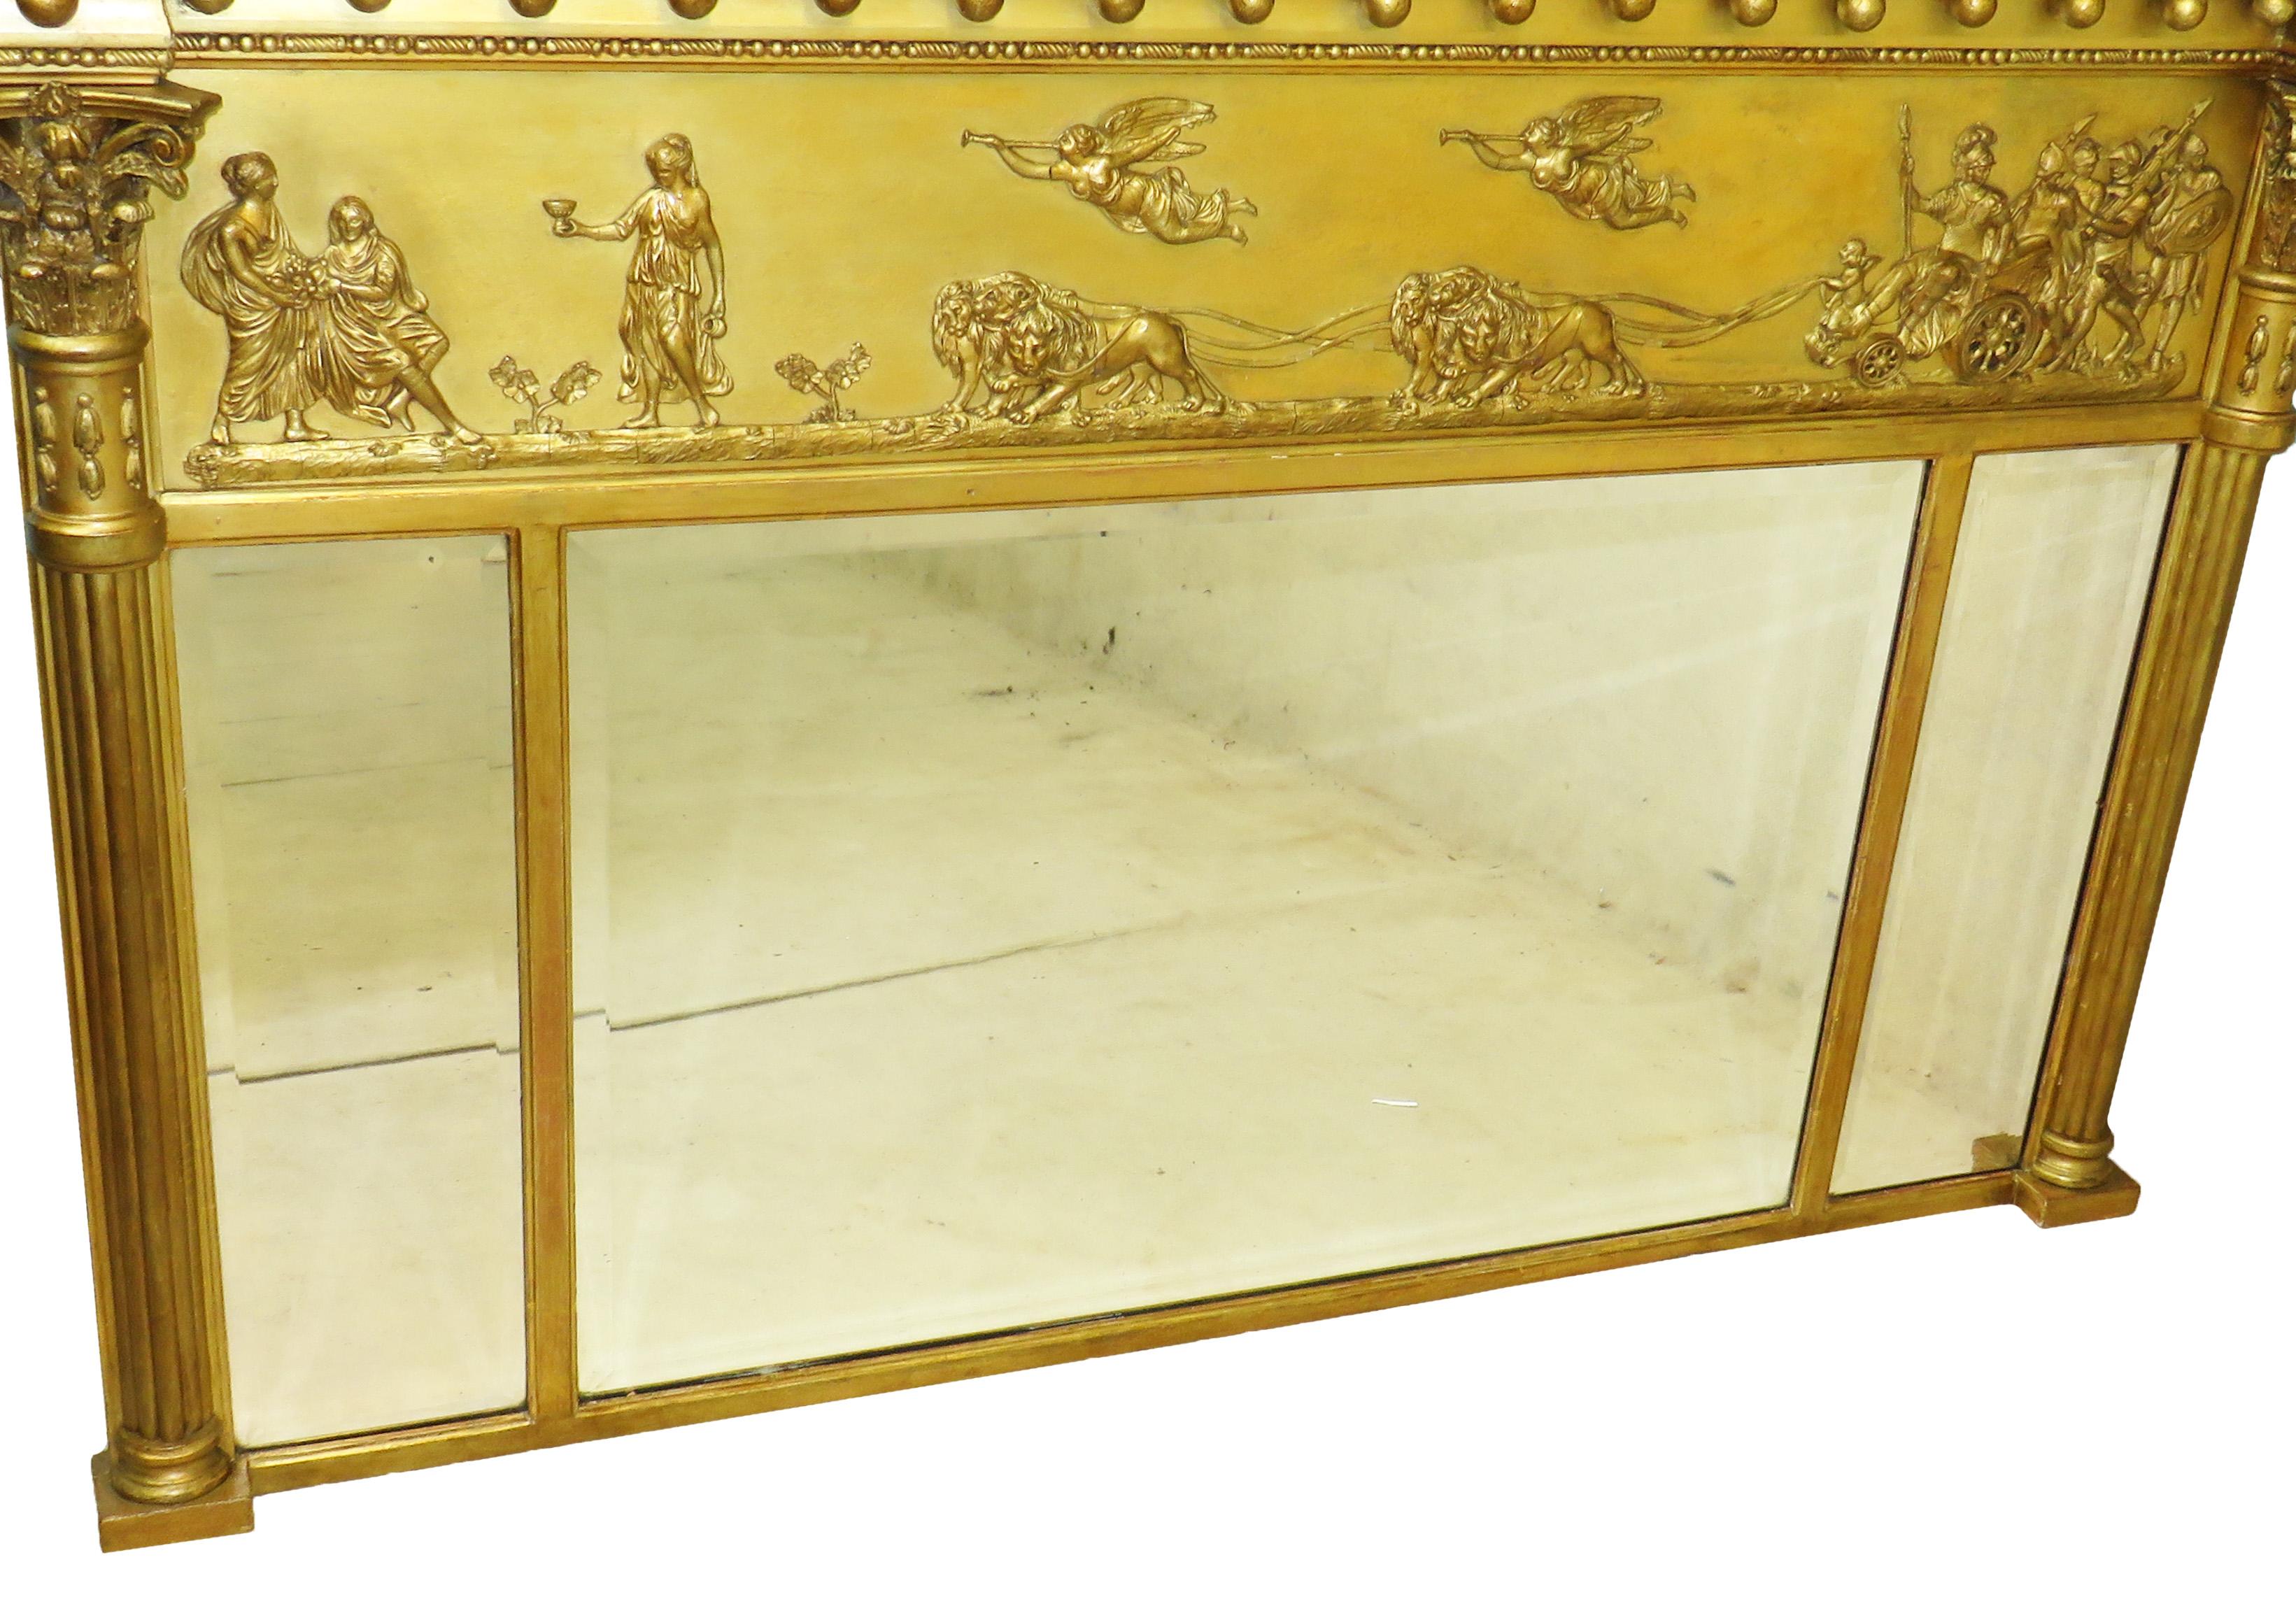 Regency Pair of Giltwood and Gesso English Overmantle Mirrors (Englisch)